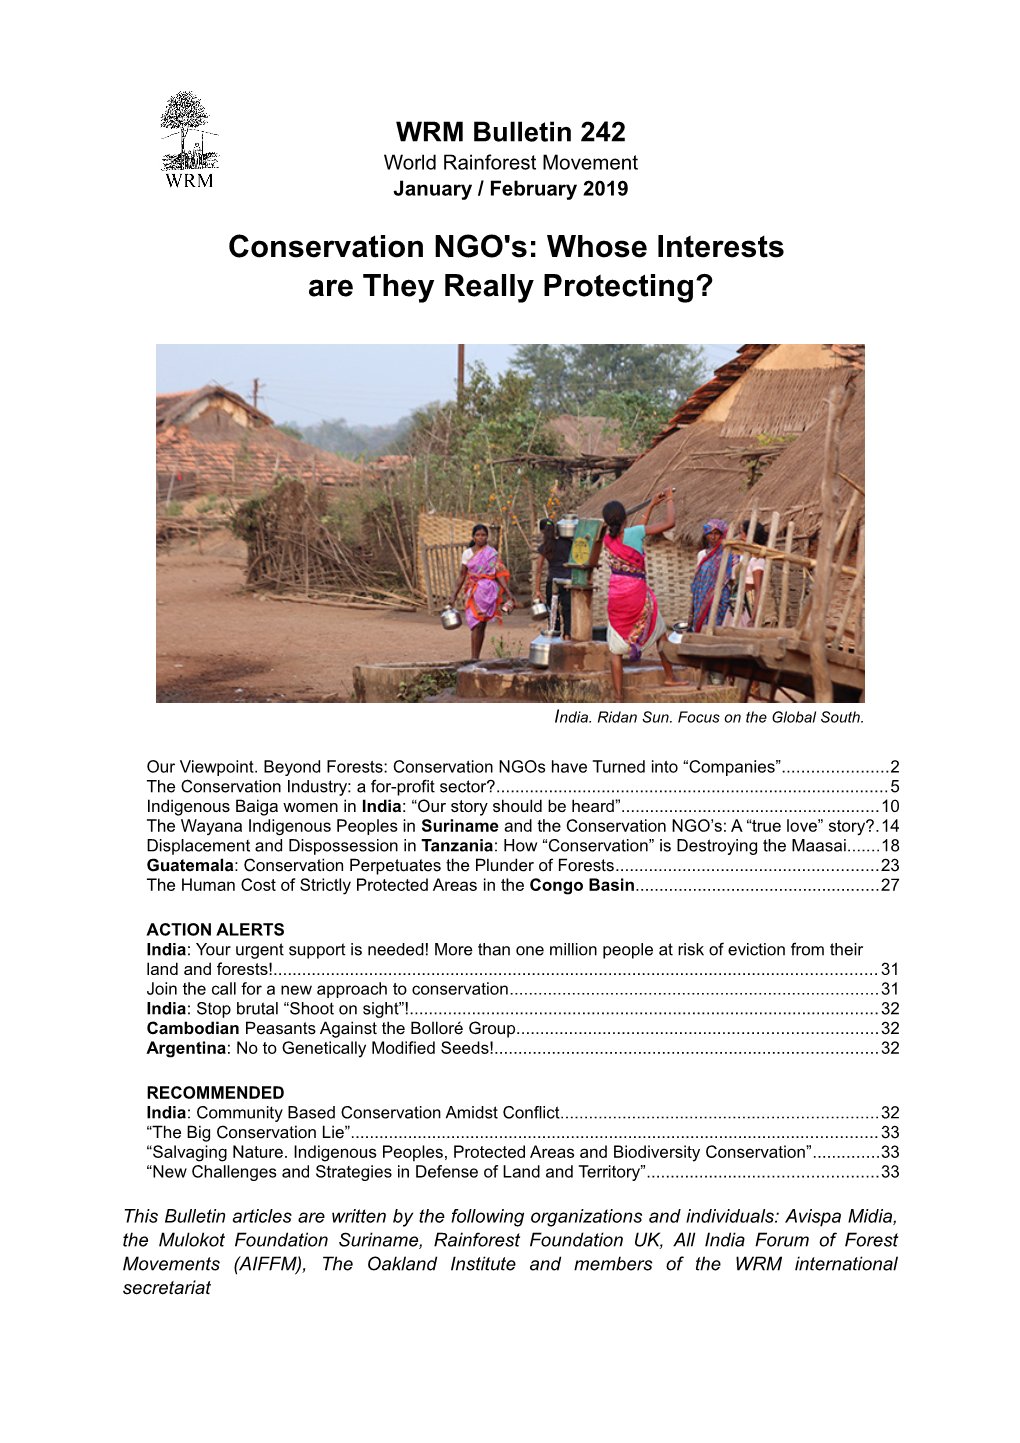 Conservation NGO's: Whose Interests Are They Really Protecting?